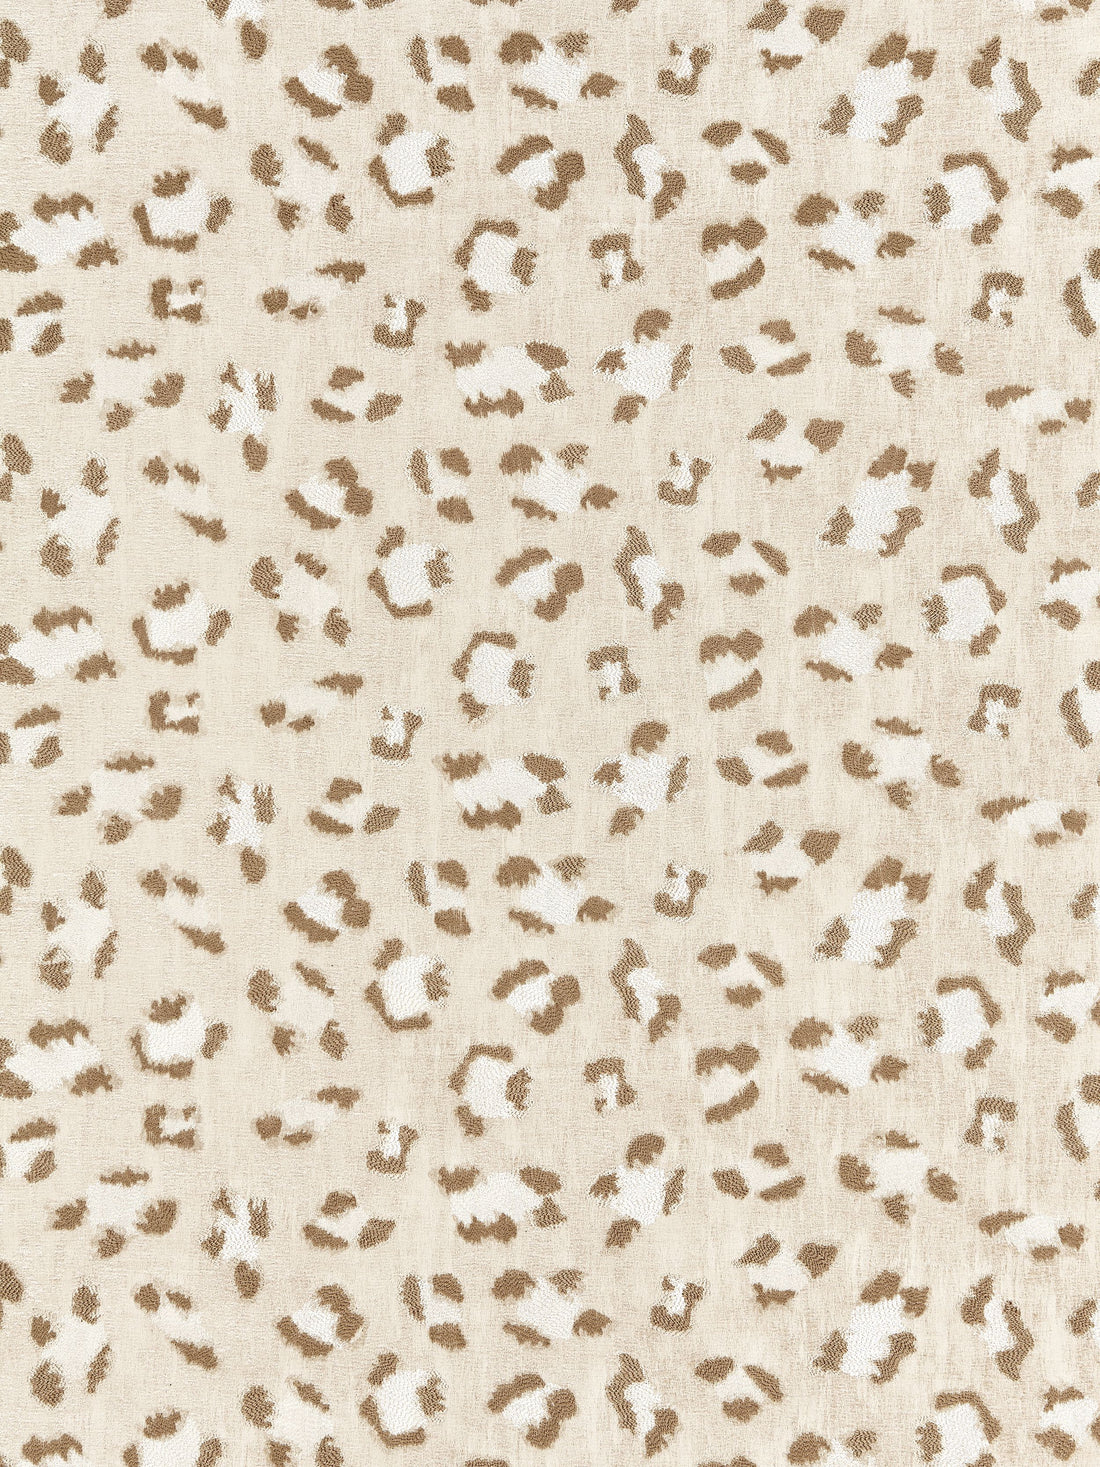 Broderie Leopard fabric in camel on cream color - pattern number SC 000127075 - by Scalamandre in the Scalamandre Fabrics Book 1 collection